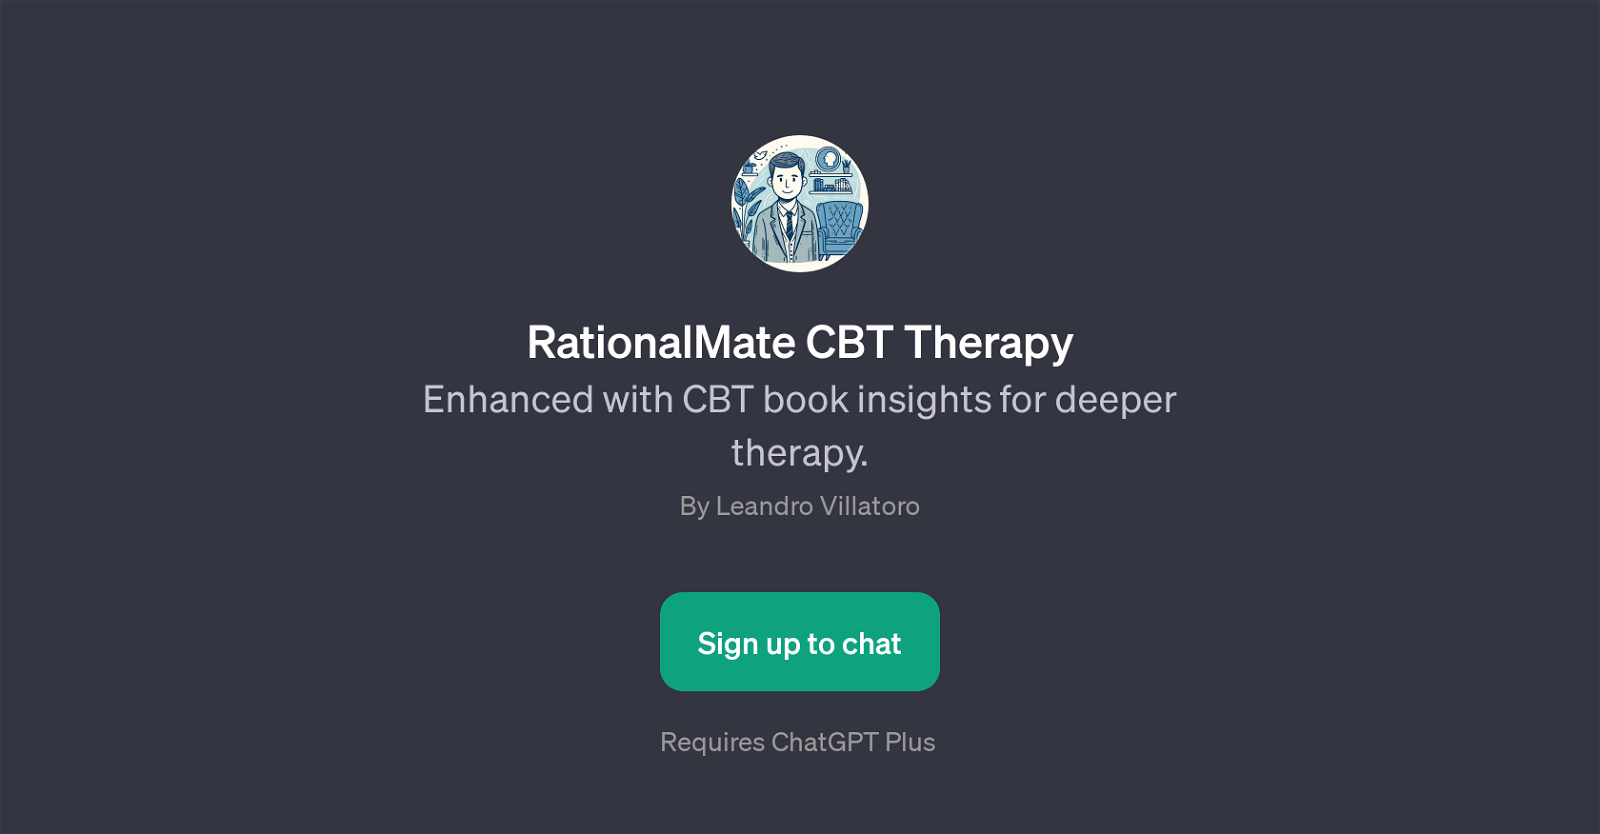 RationalMate CBT Therapy website